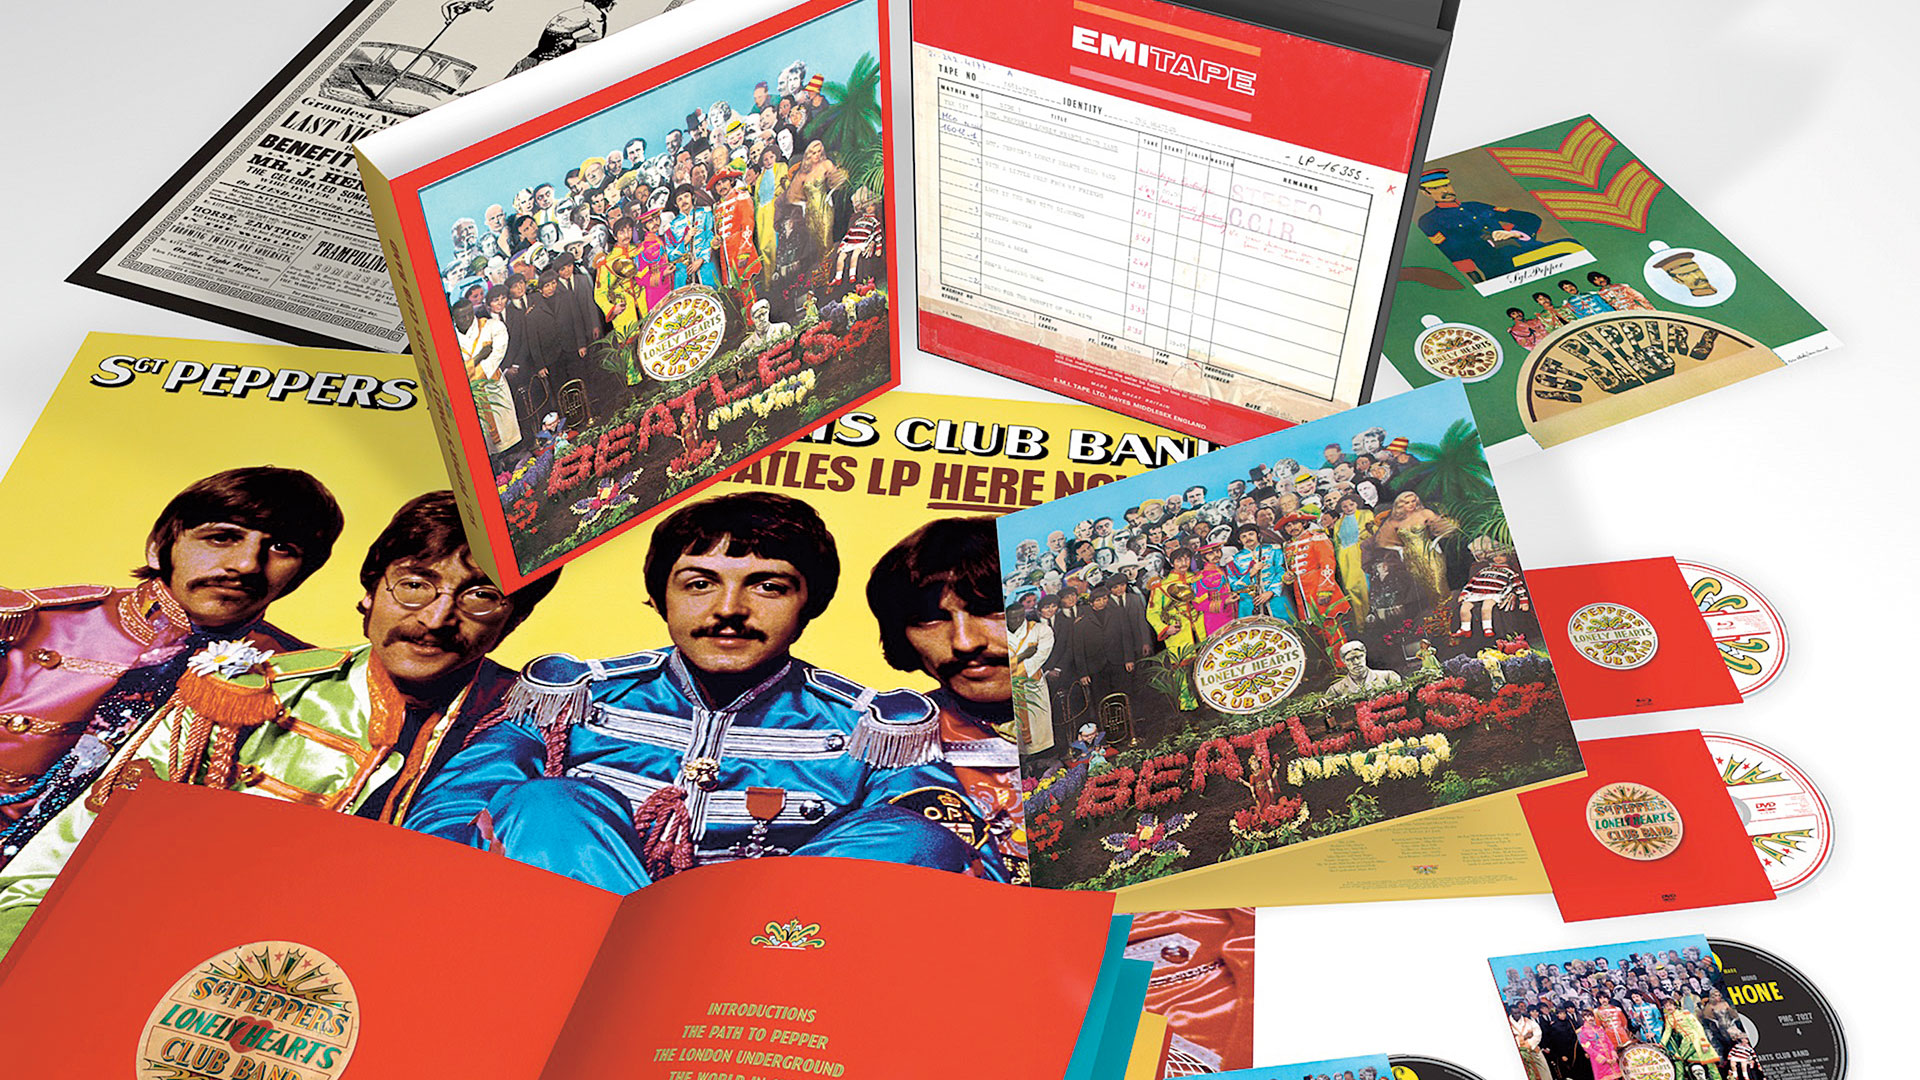 Sgt. Pepper's Lonely Hearts Club Band deluxe edition